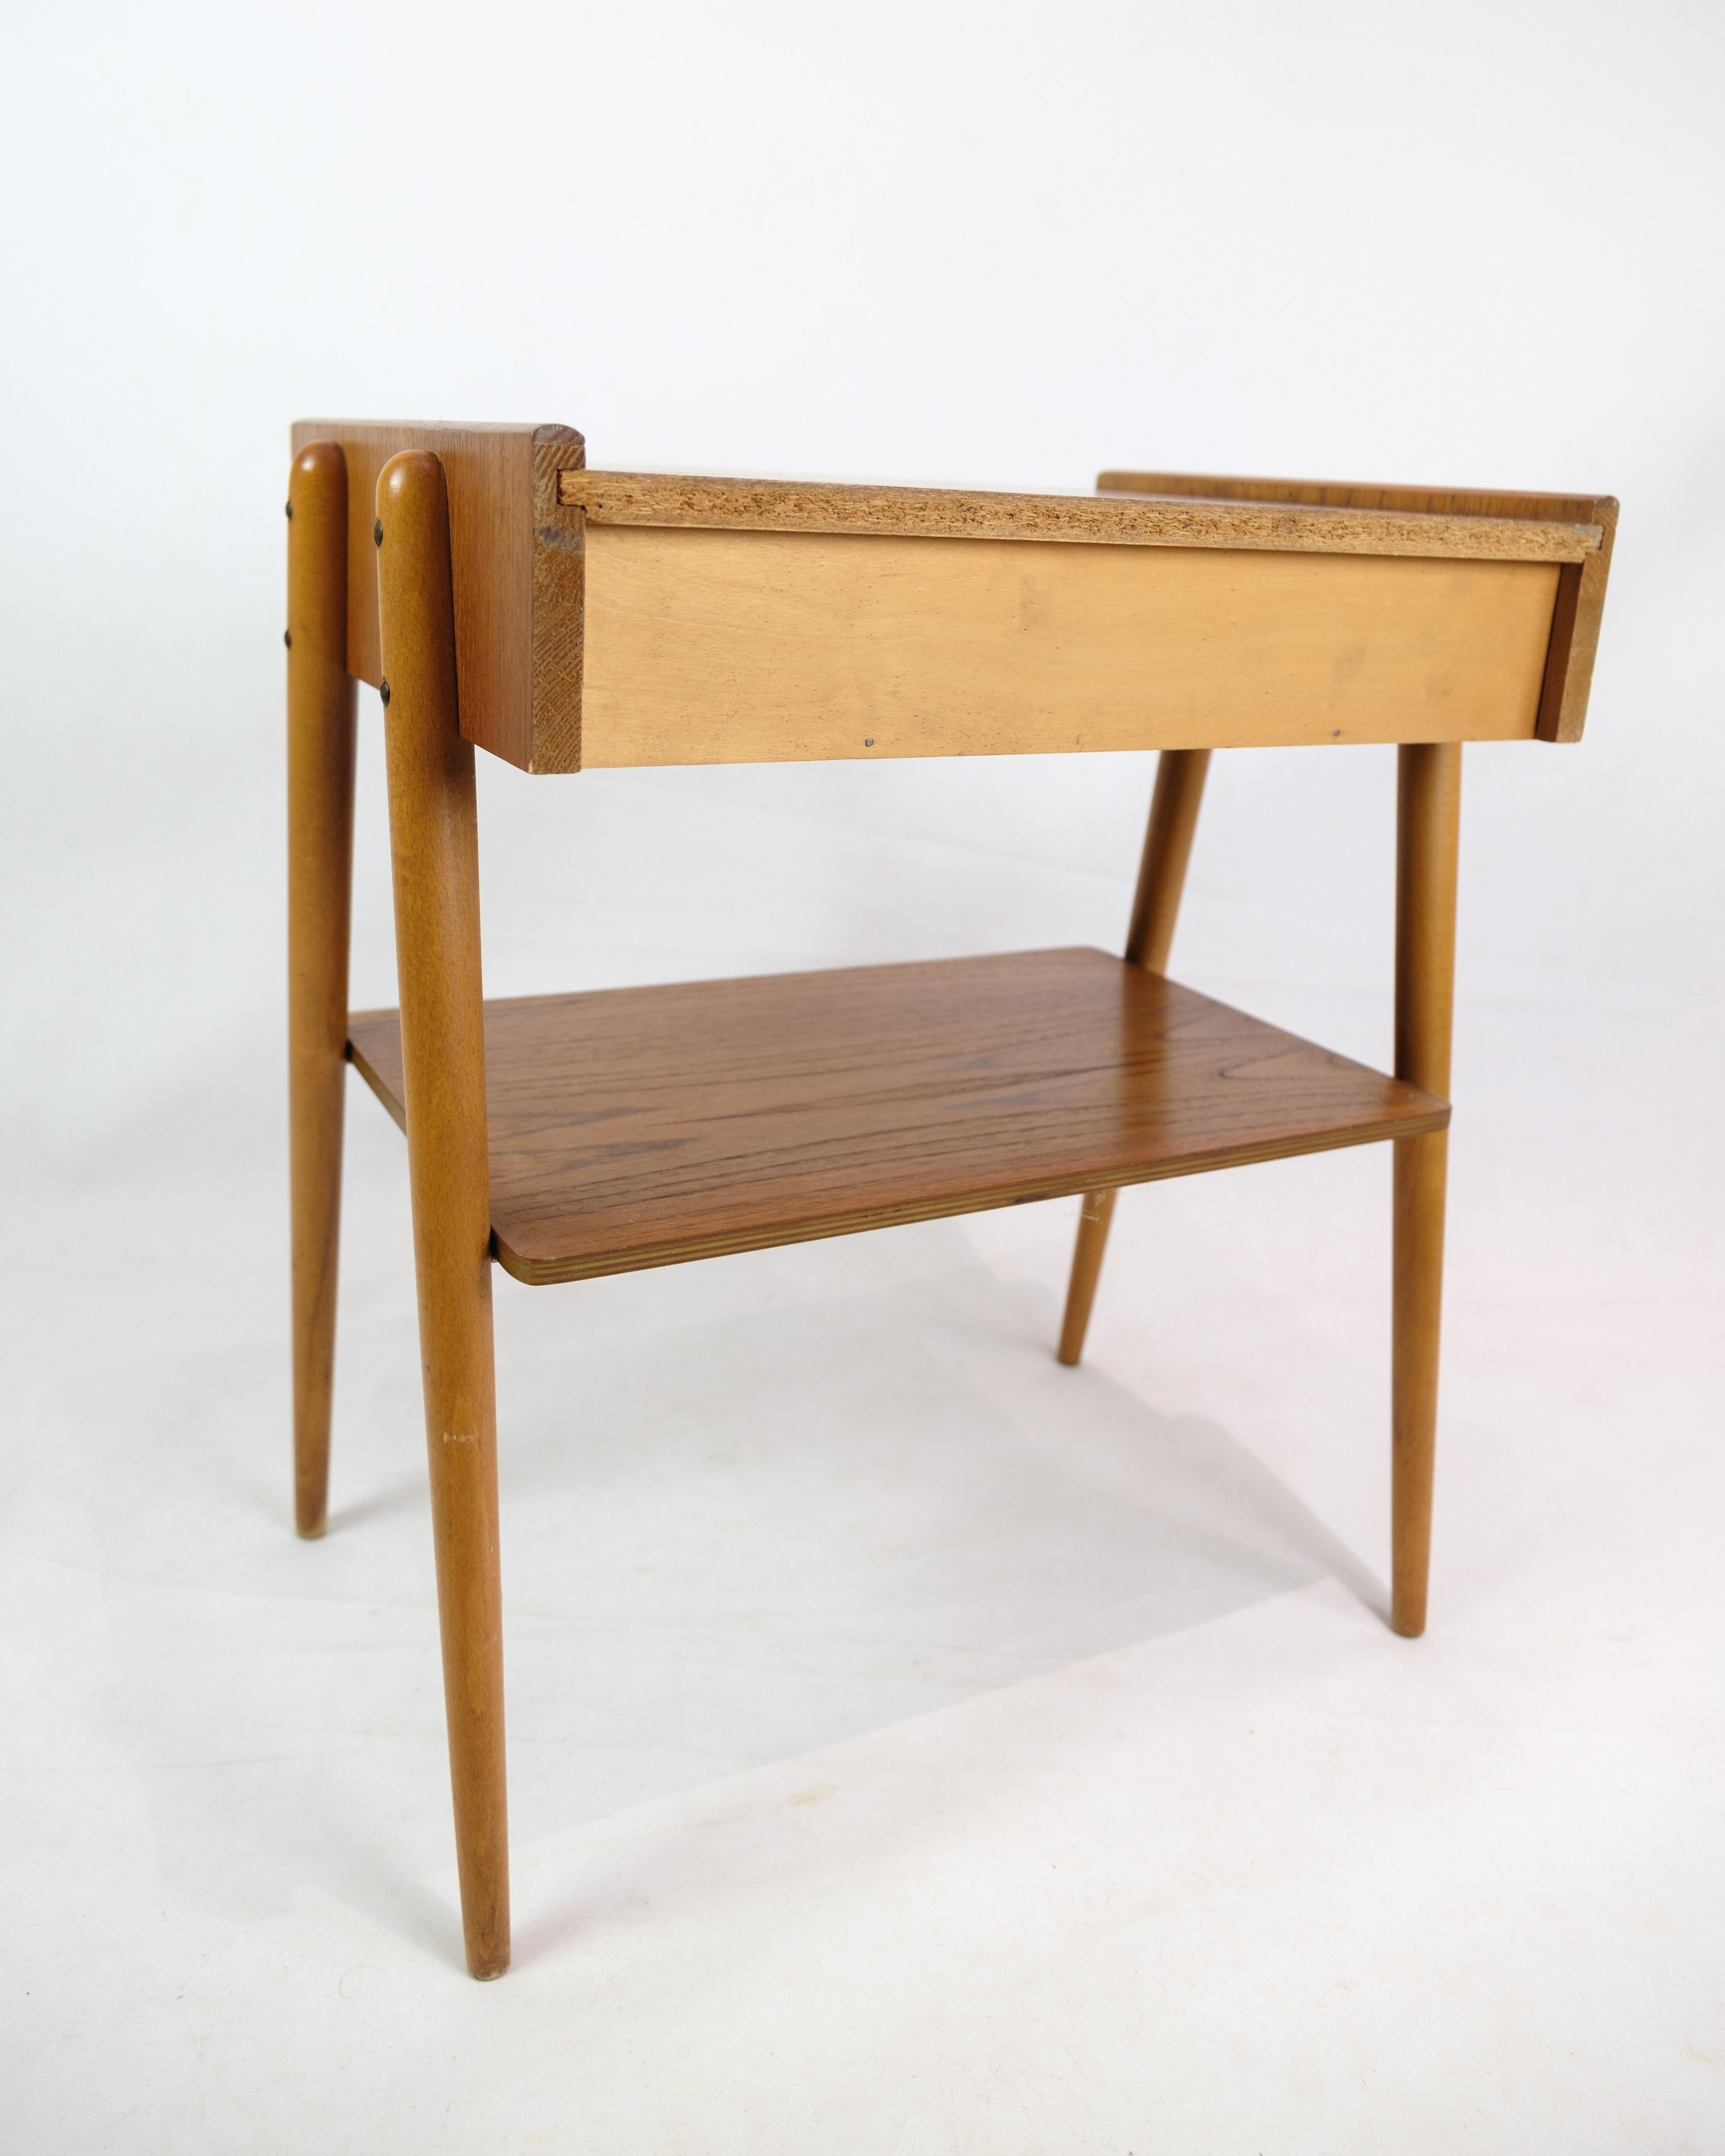 Set of Nightstands In Teak, By AB Carlström & Co Furniture Factory From 1950s For Sale 7